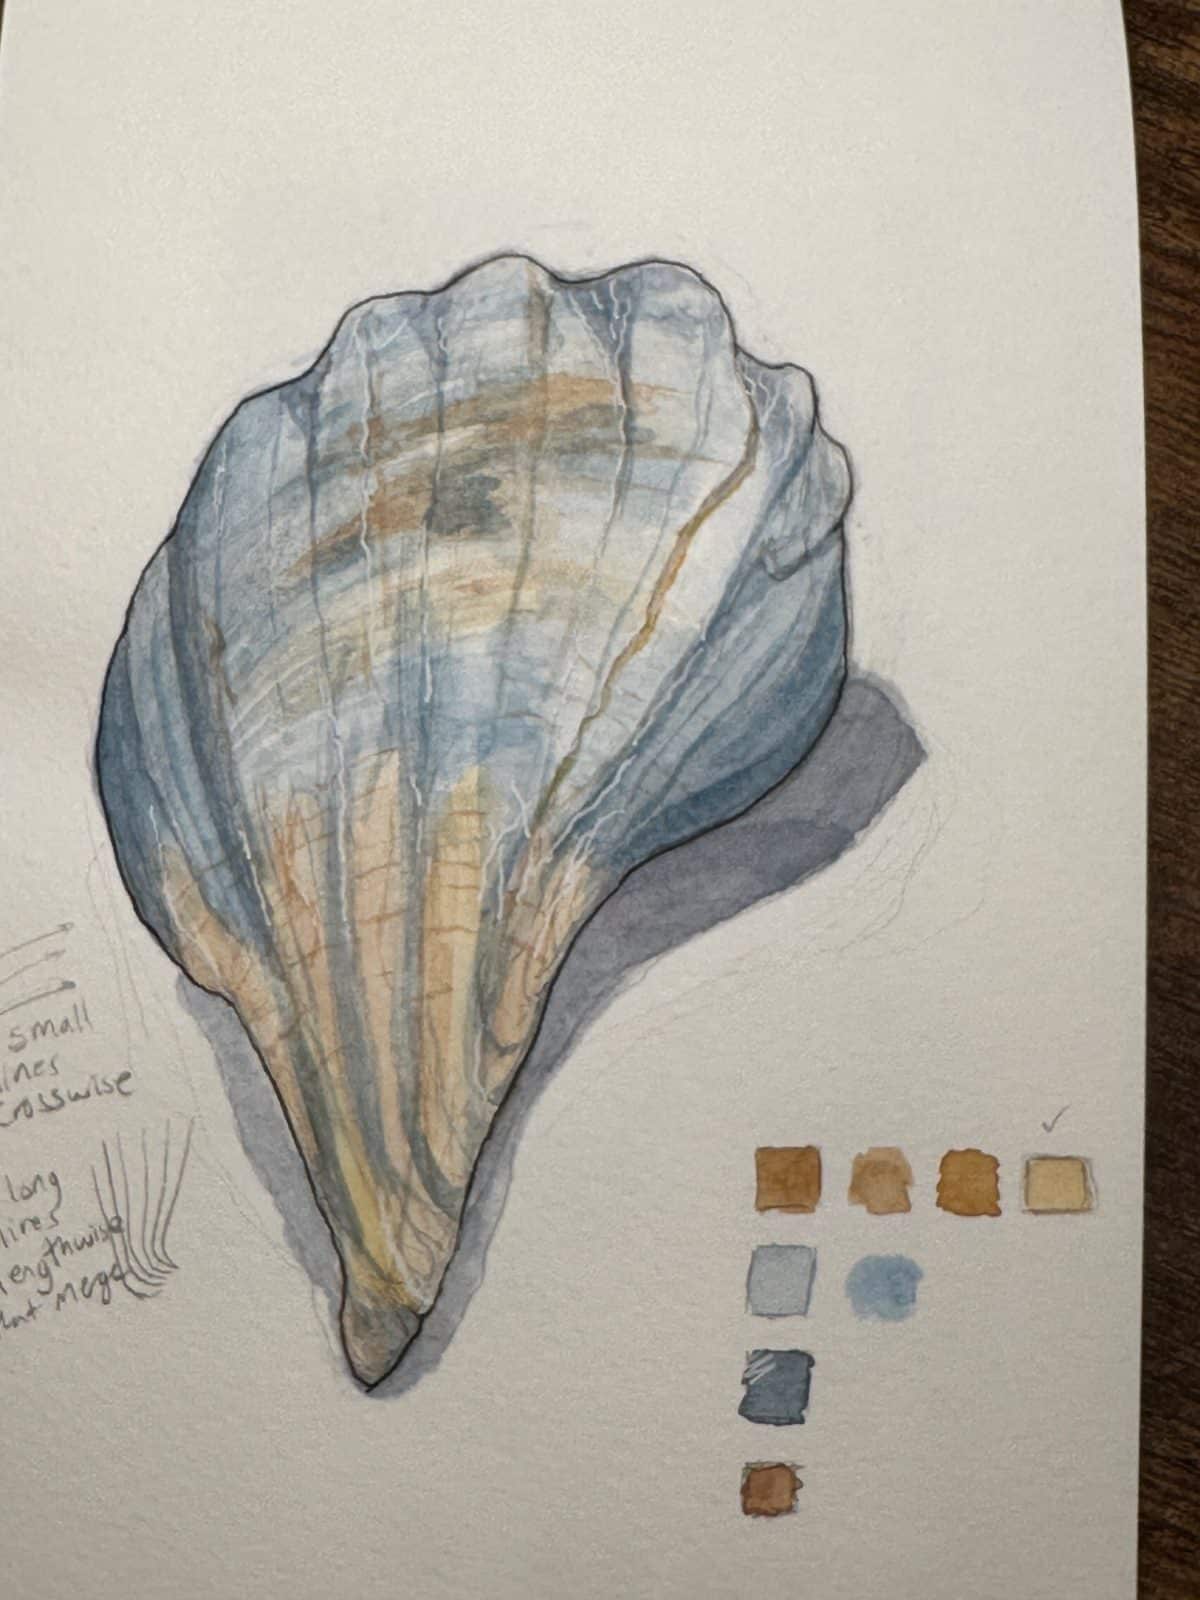 A sketch of a shell. Sketching nature, respect and wonder